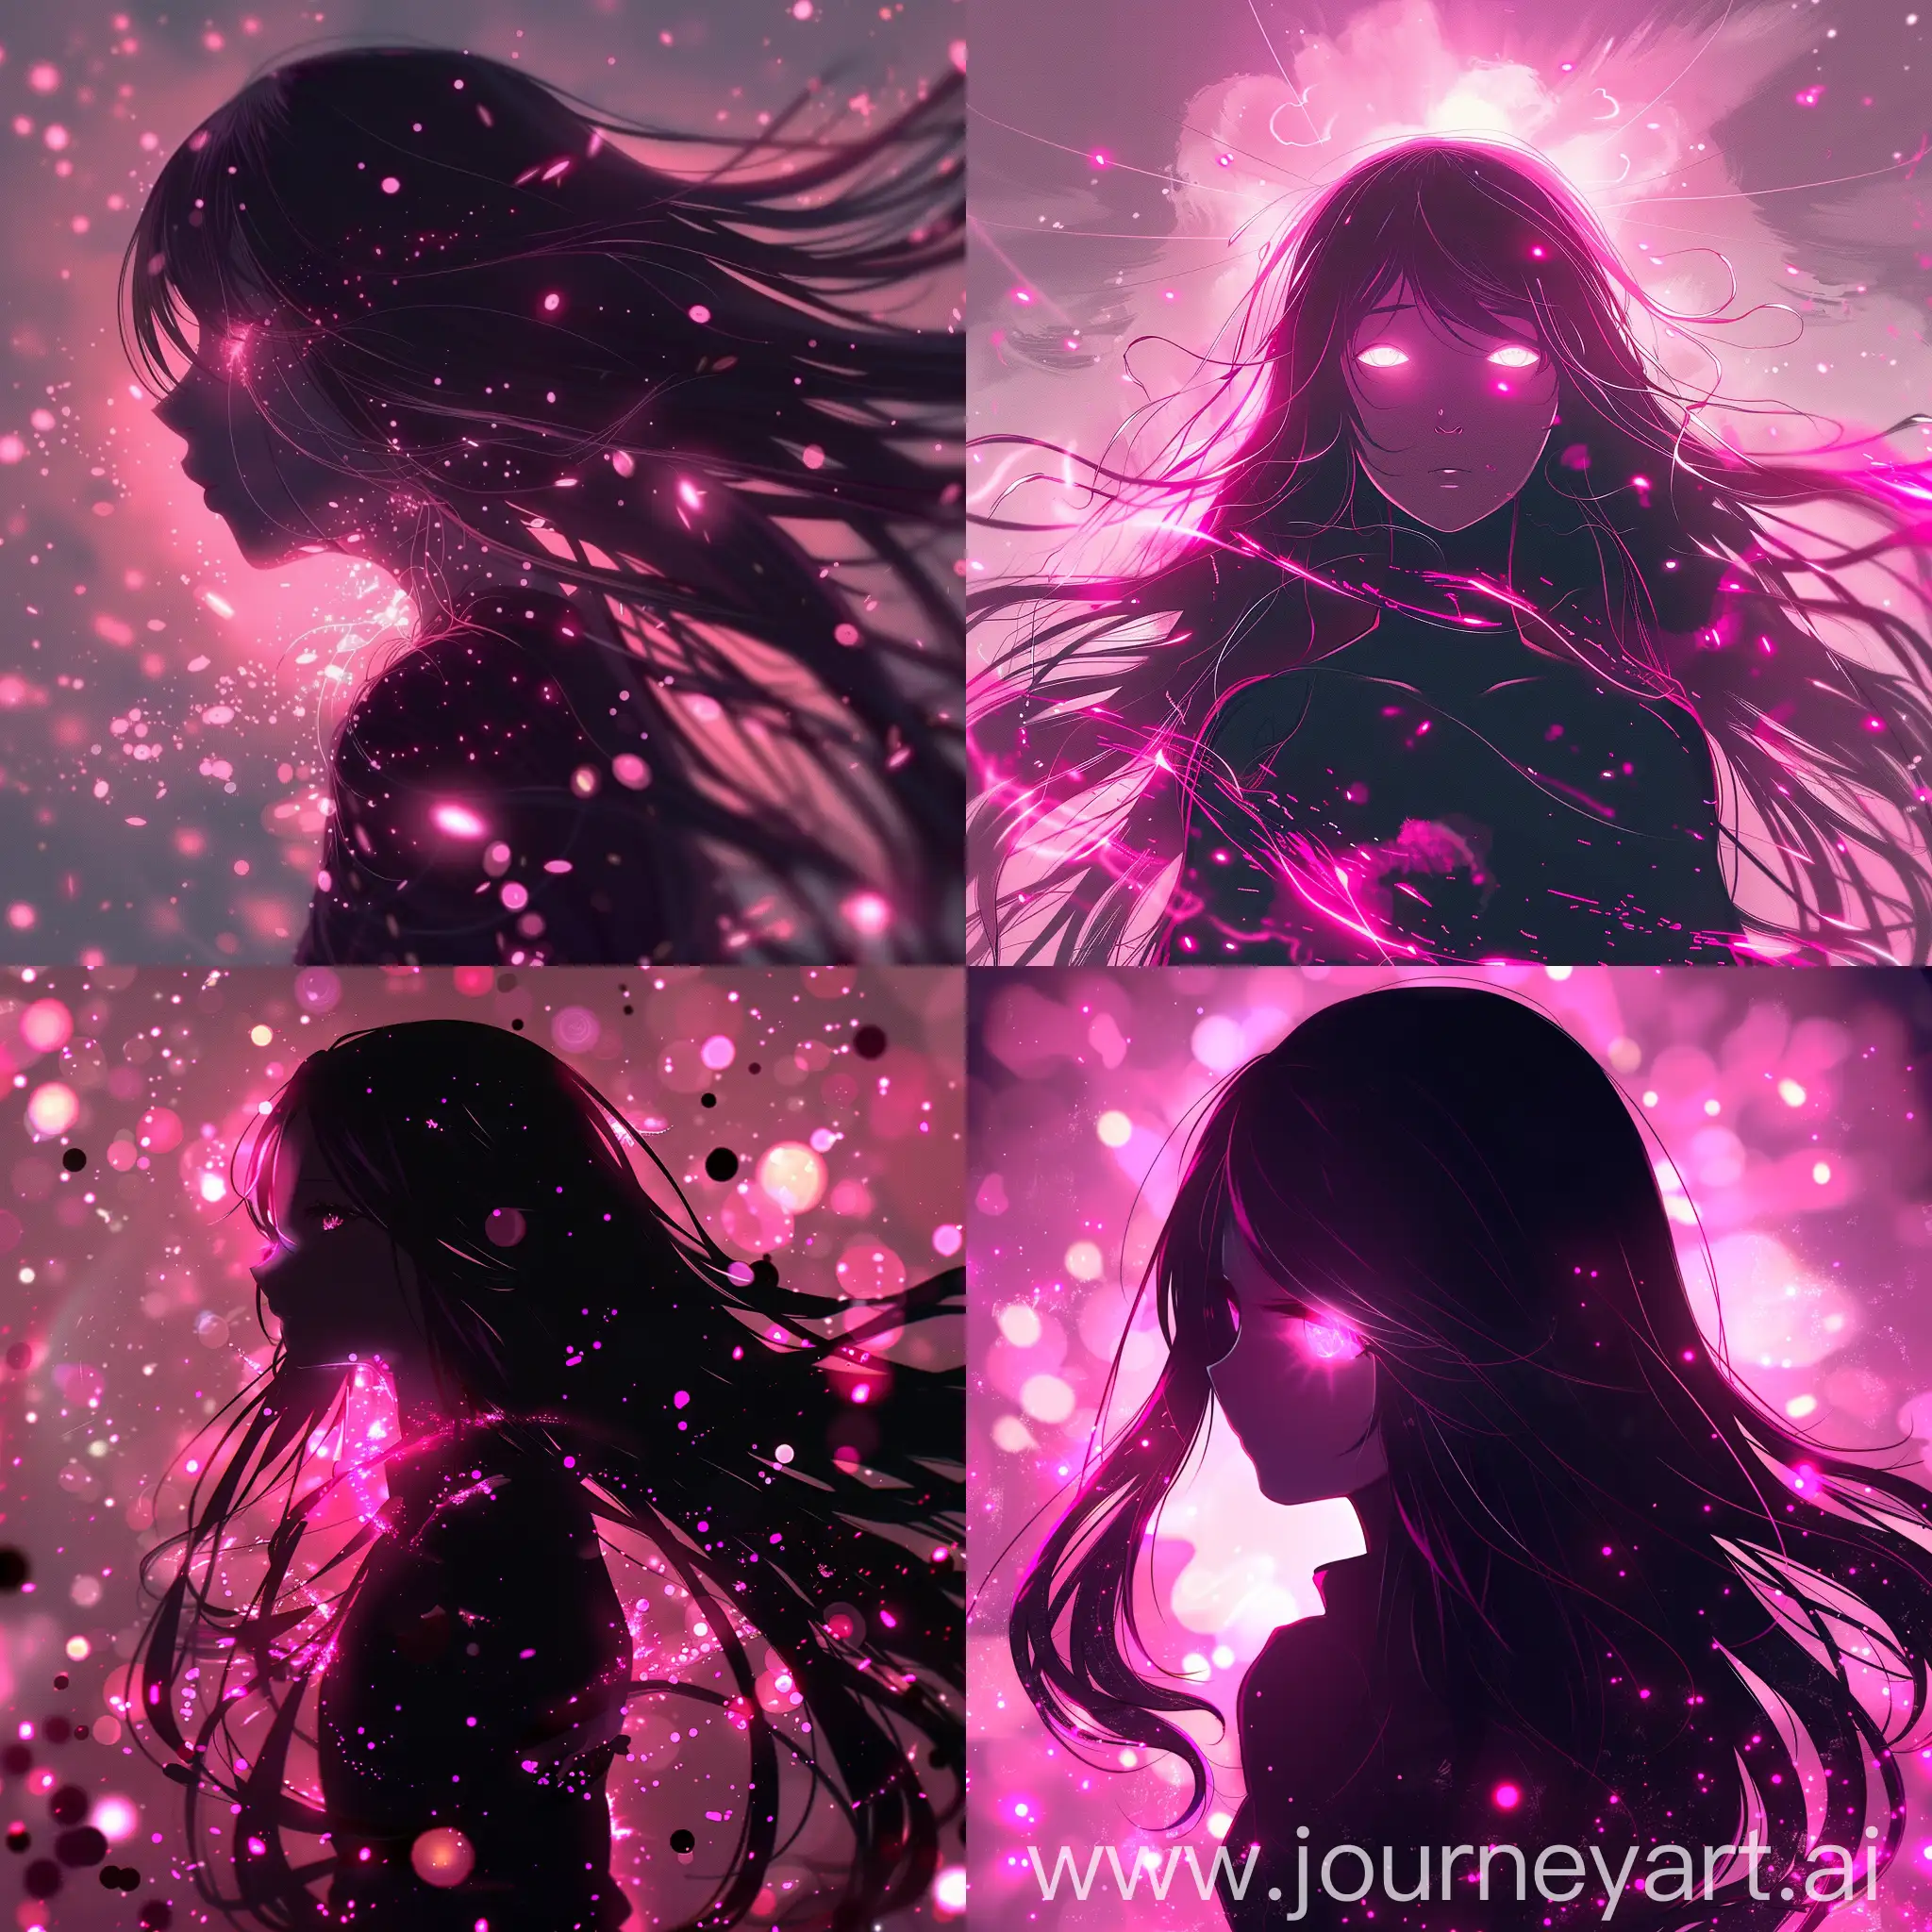 Silhouette-of-Anime-Girl-with-Glowing-Pink-Eyes-and-Radiant-Particles